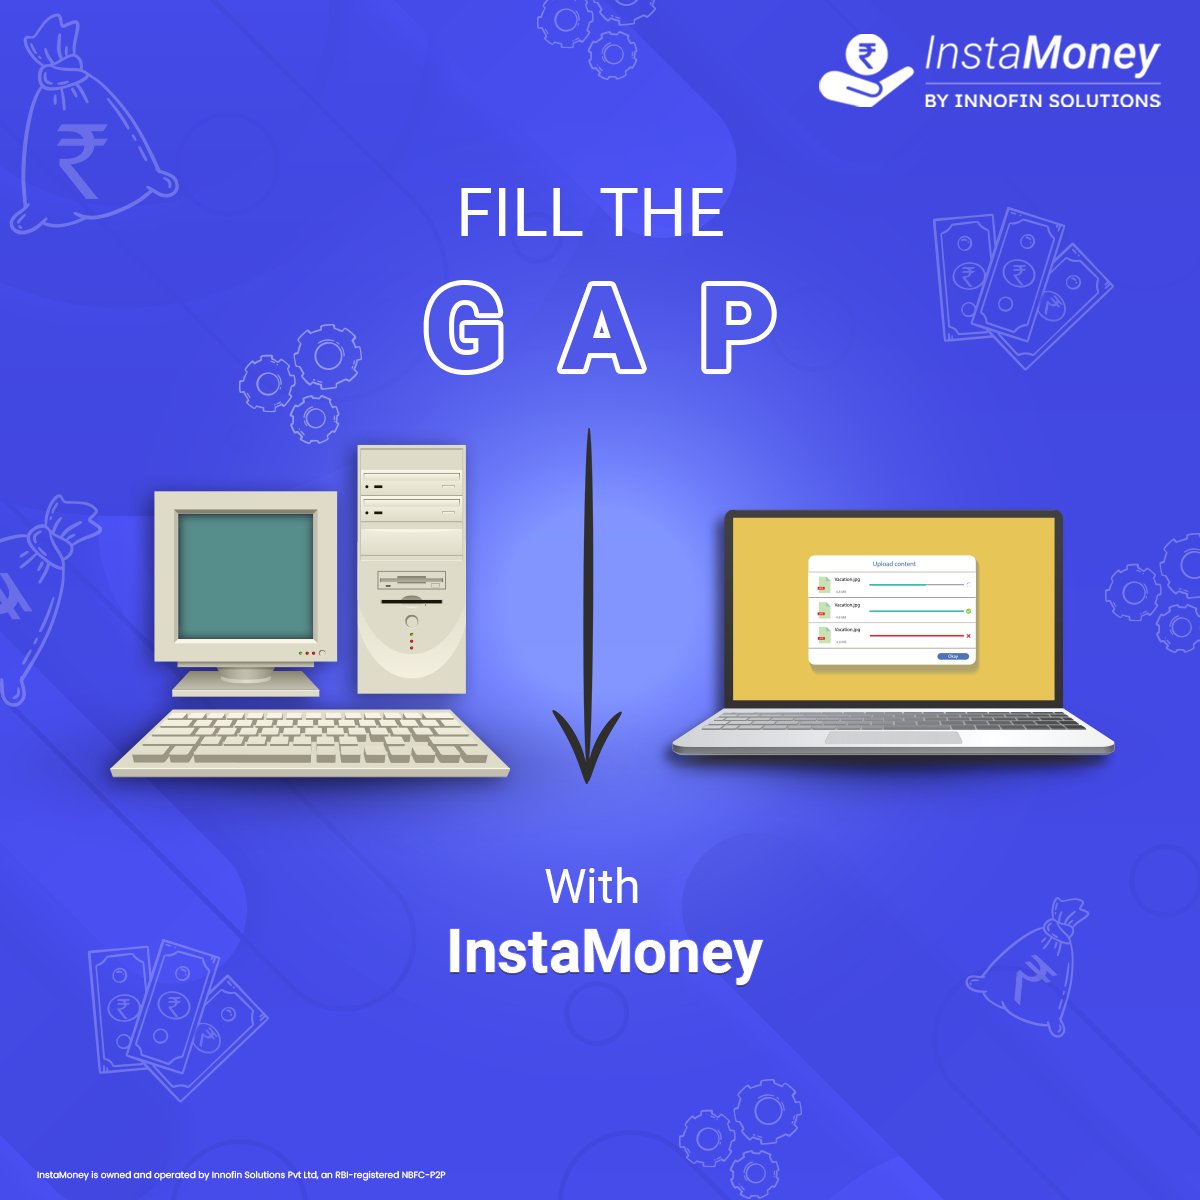 Ready for an upgrade? InstaMoney has you covered, helping you bridge the gap for smooth, stress-free tech upgrade.

#InstaMoney #LiveYourLife #QuickLoans #FillTheGap #FinancialFreedom #InstantLoans #Fintech #LoanApp #PersonalLoan #InstantCash